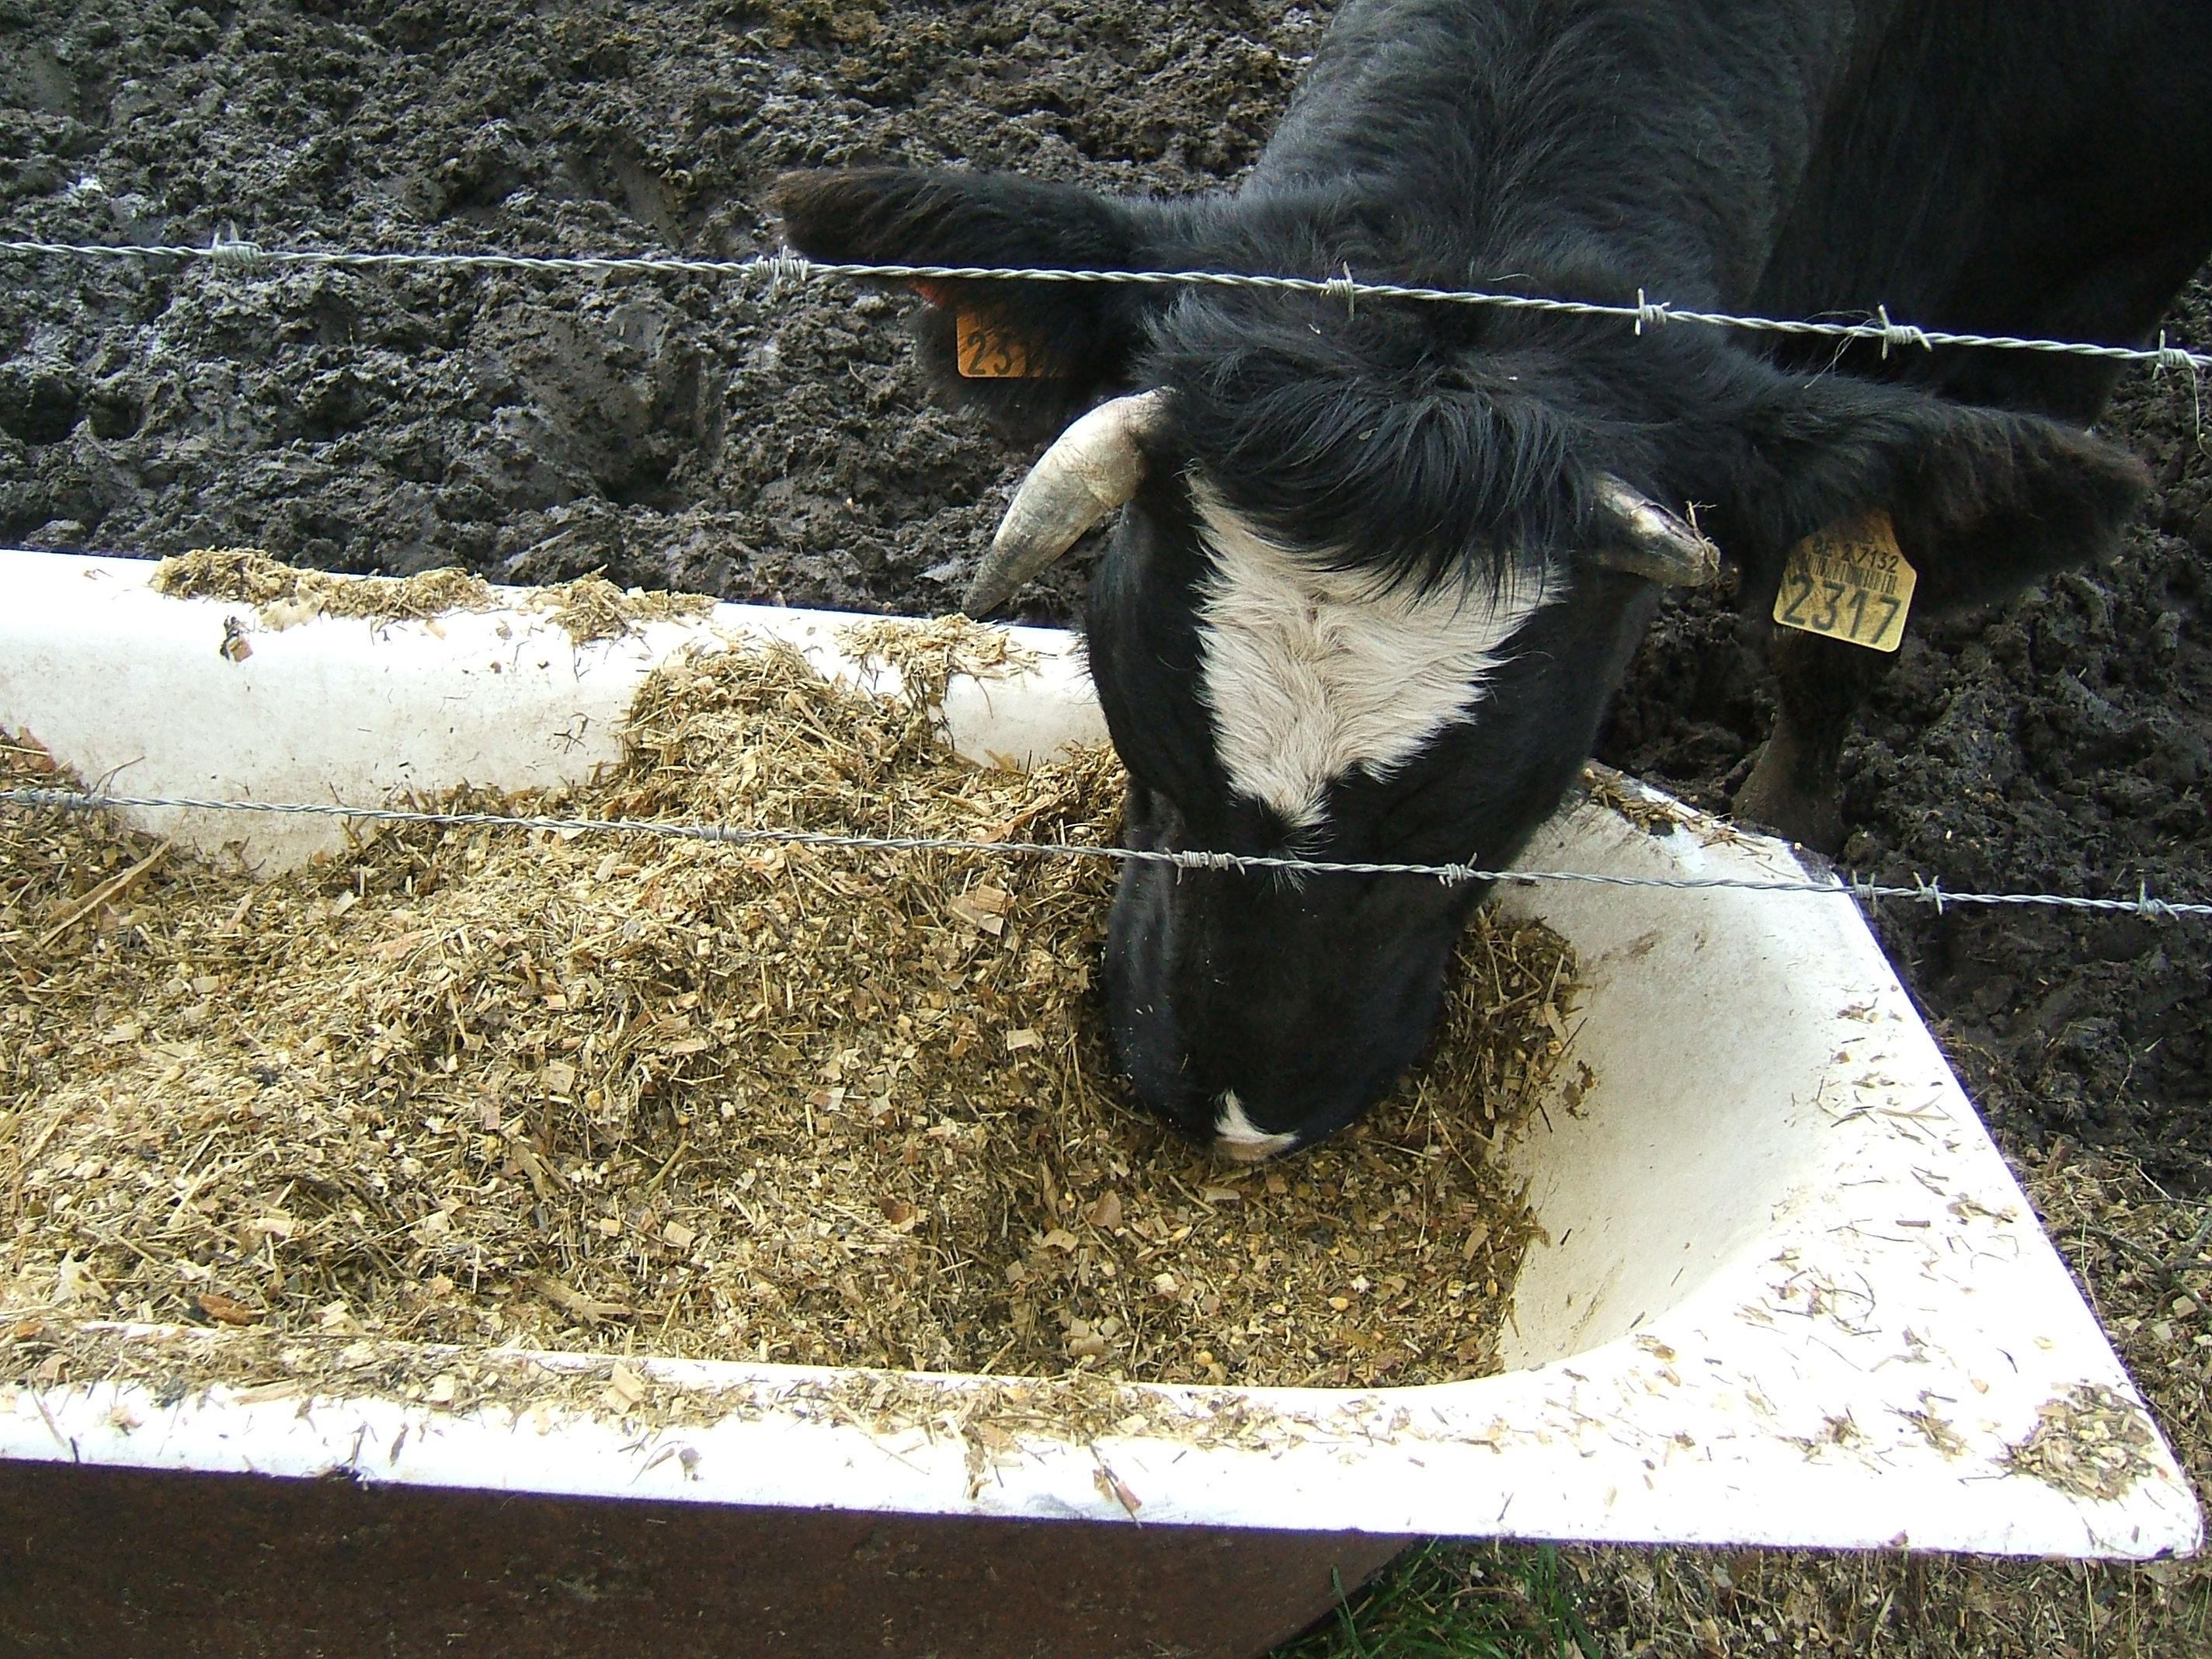 cow feeding on sillage from a large tub behind a thin wire fence